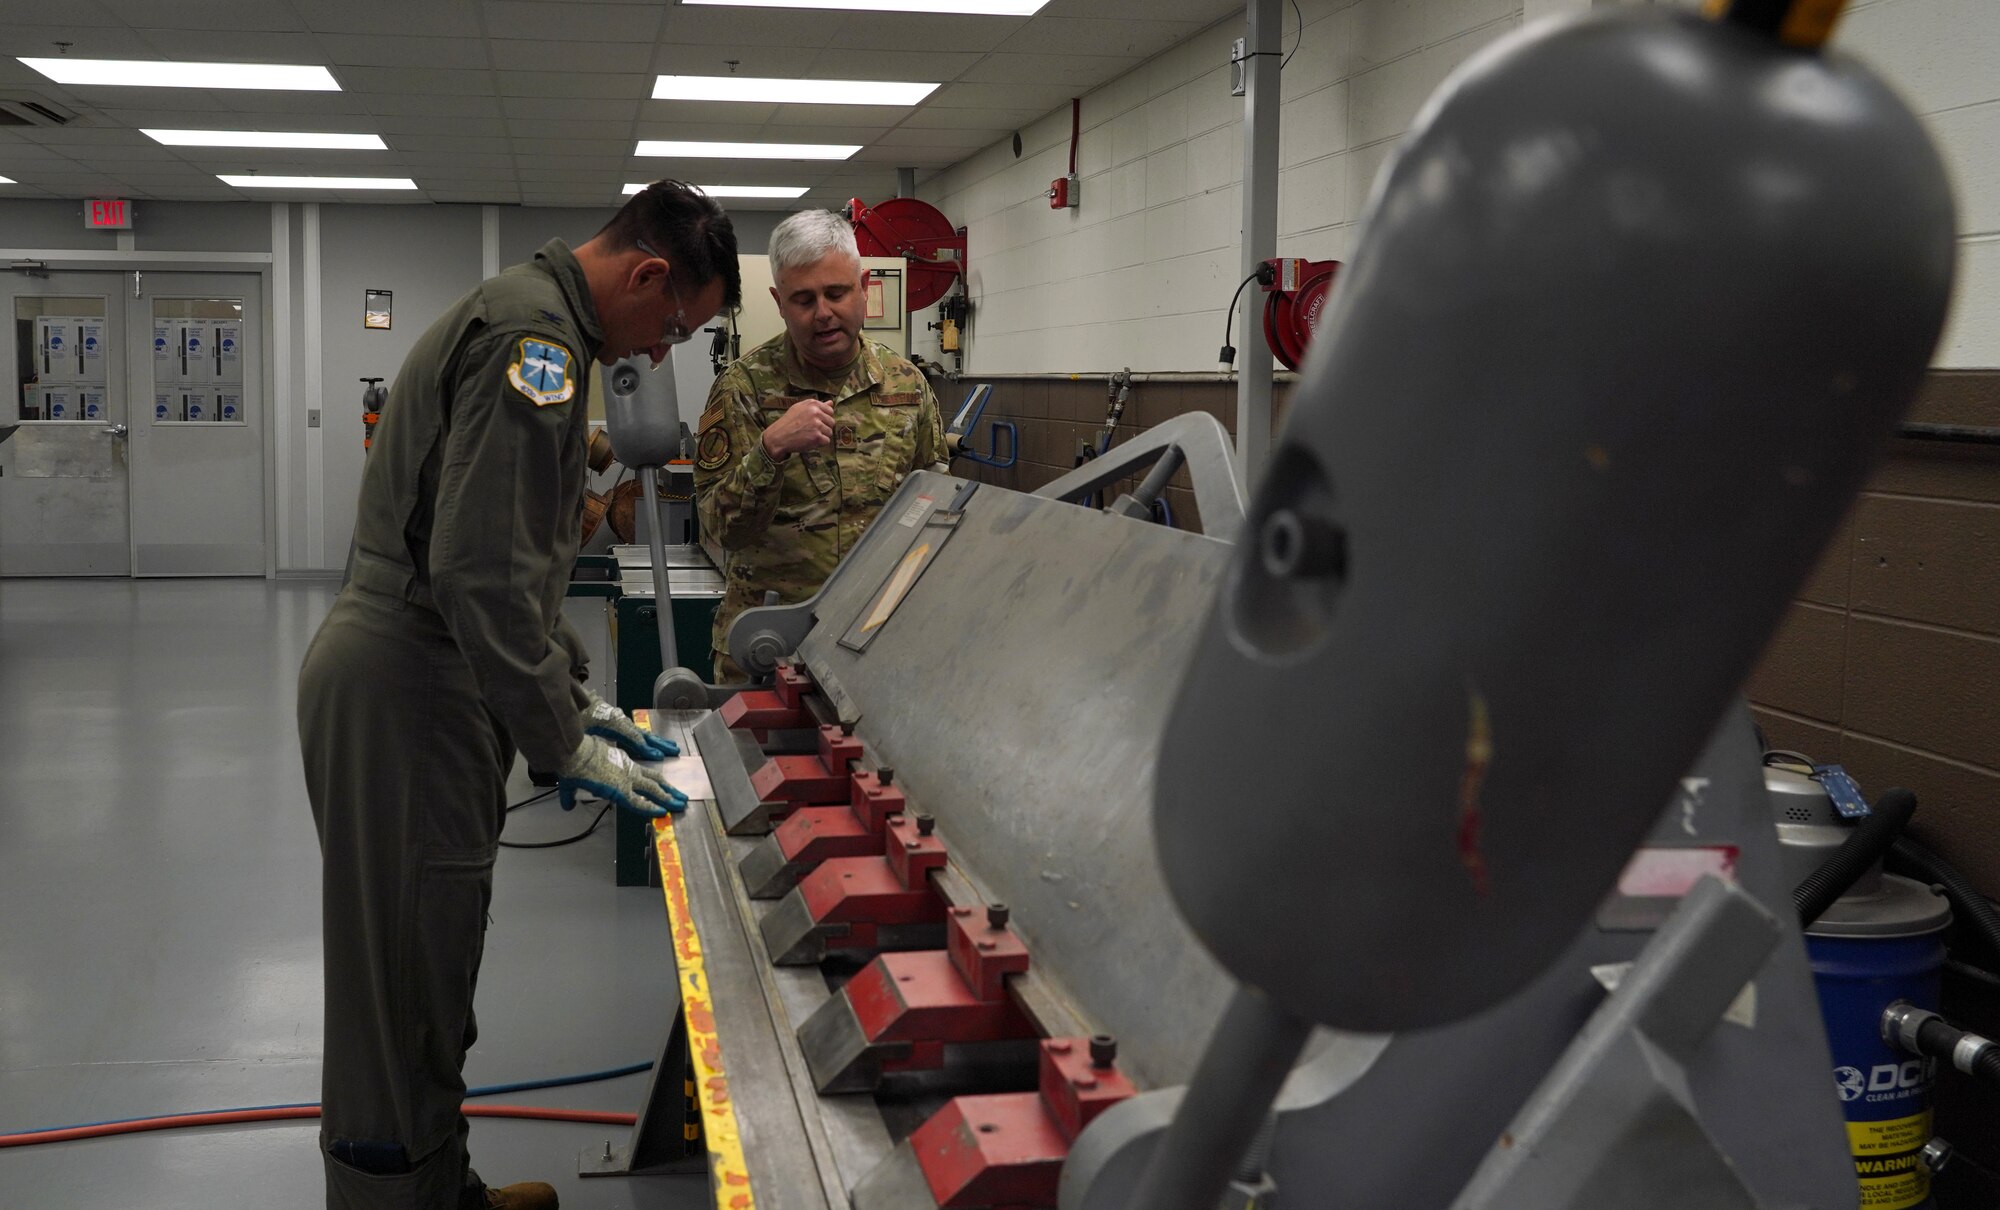 Senior Master Sgt. explains how to operate the machine used to bend sheet metal.